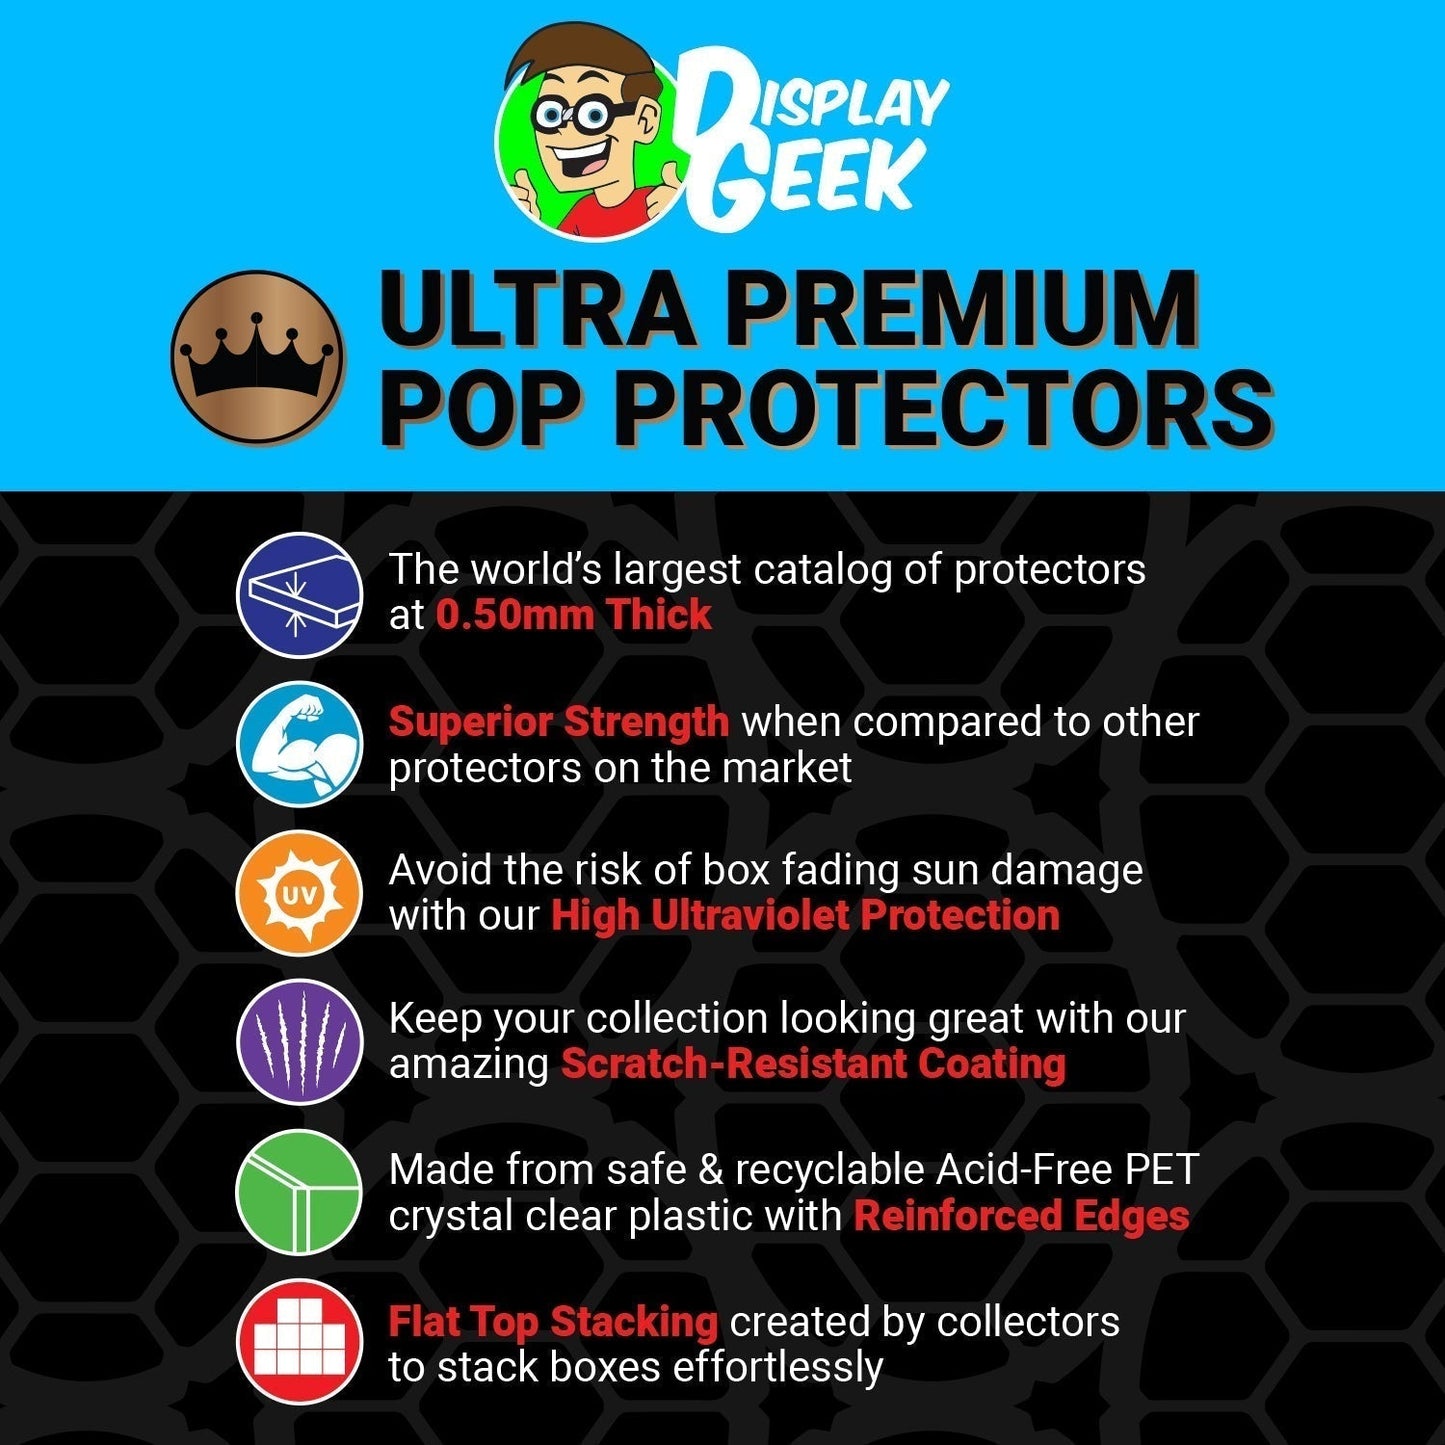 Pop Protector for Friends Chandler Bing FunkO's Cereal Box - PPG Pop Protector Guide Search Created by Display Geek